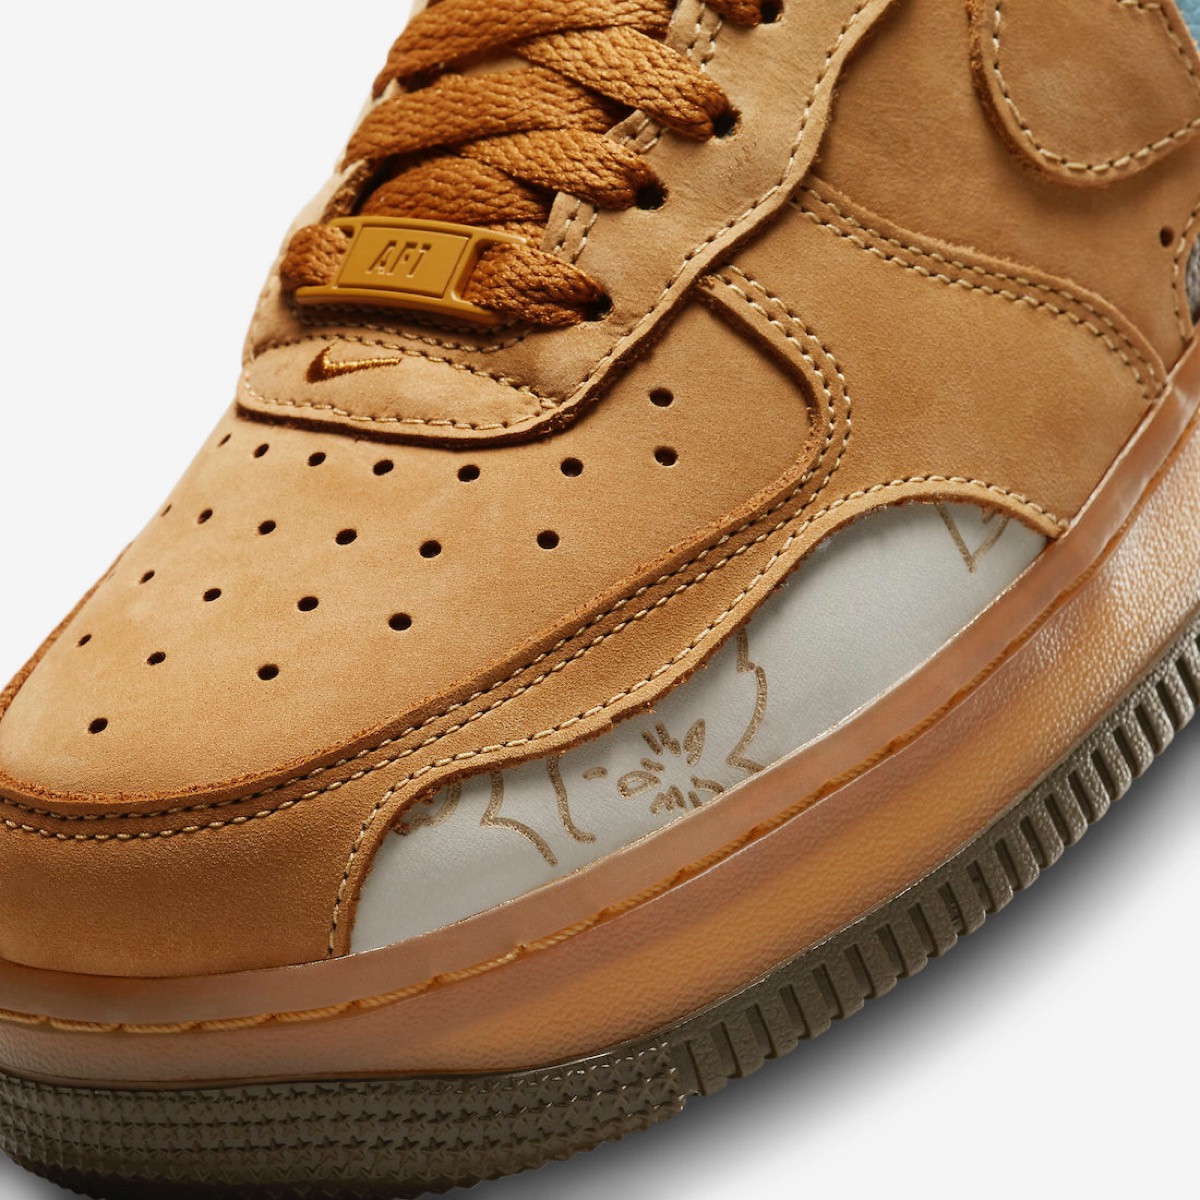 Nike WMNS Air Force 1 Low Wheat and Dark